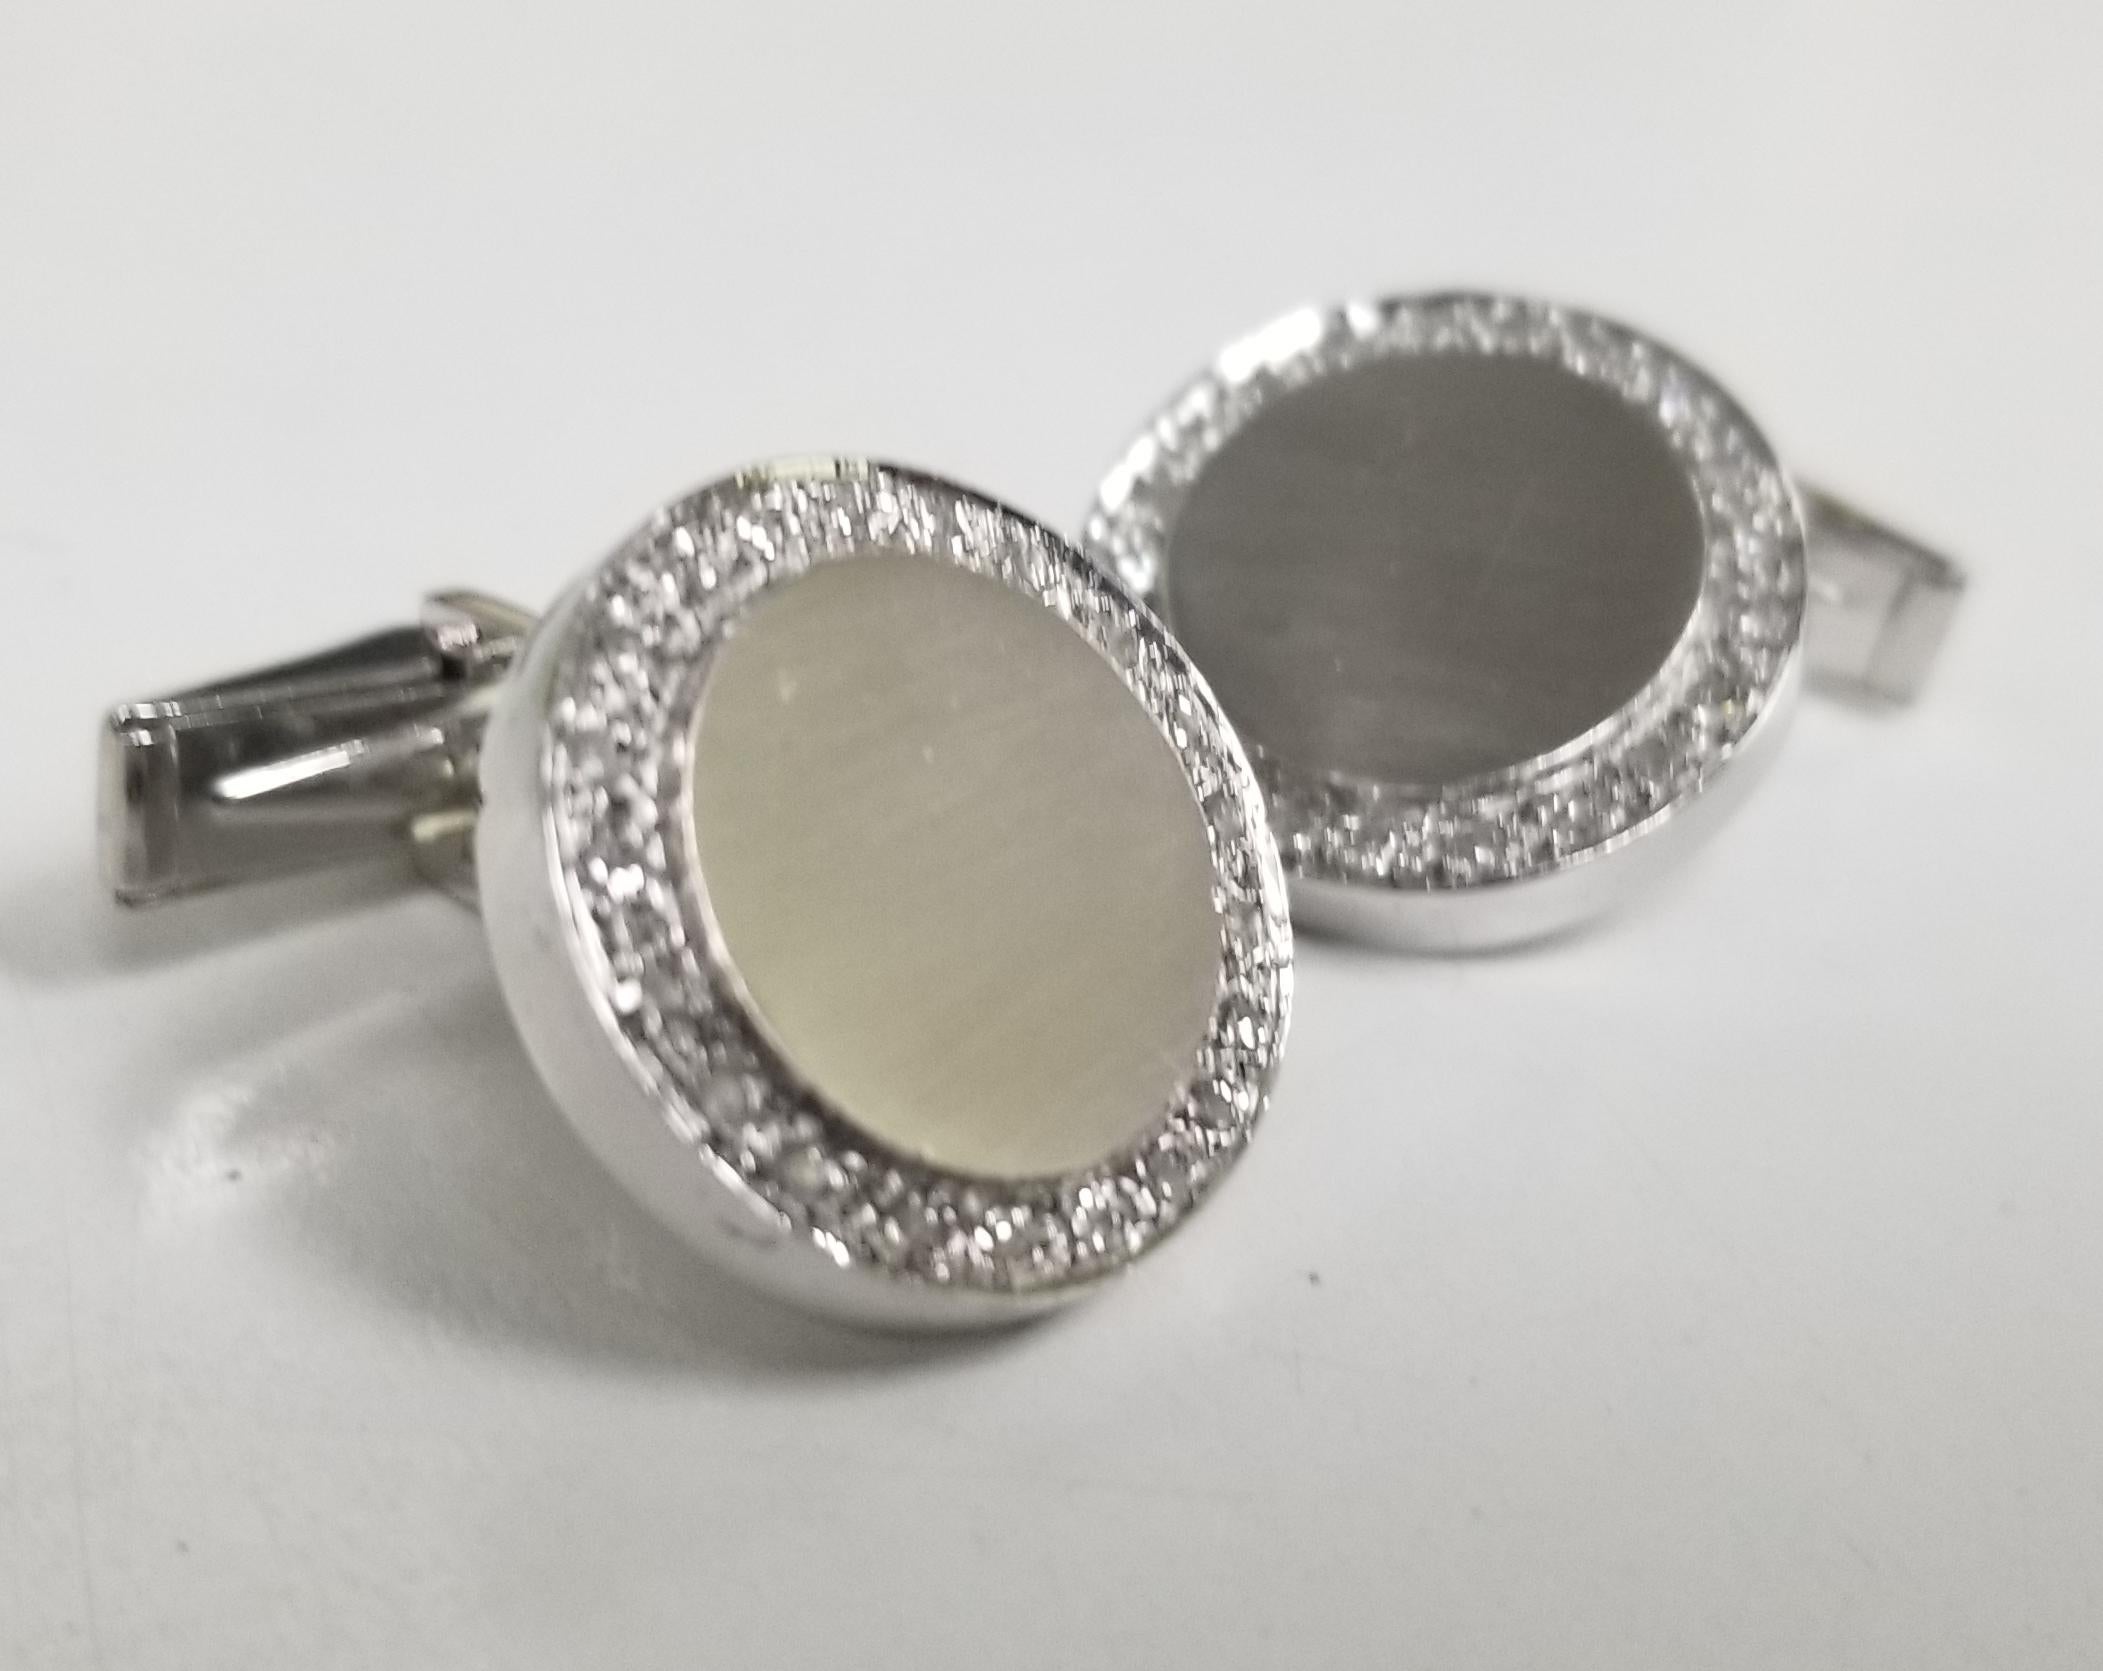 14k white gold diamond cuff links with brushed finish containing 42 single cut diamonds of very fine quality weighing 1.00cts.